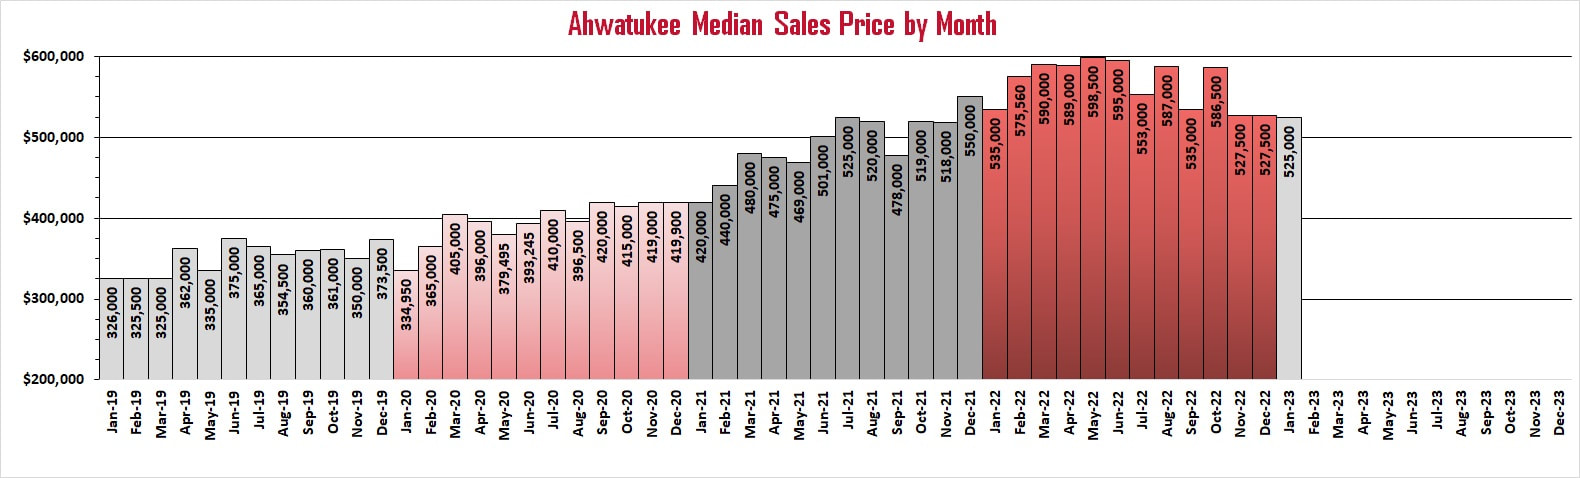 Ahwatukee Market Reports | Ahwatukee Median Home Prices by Month | Troy Erickson Realtor